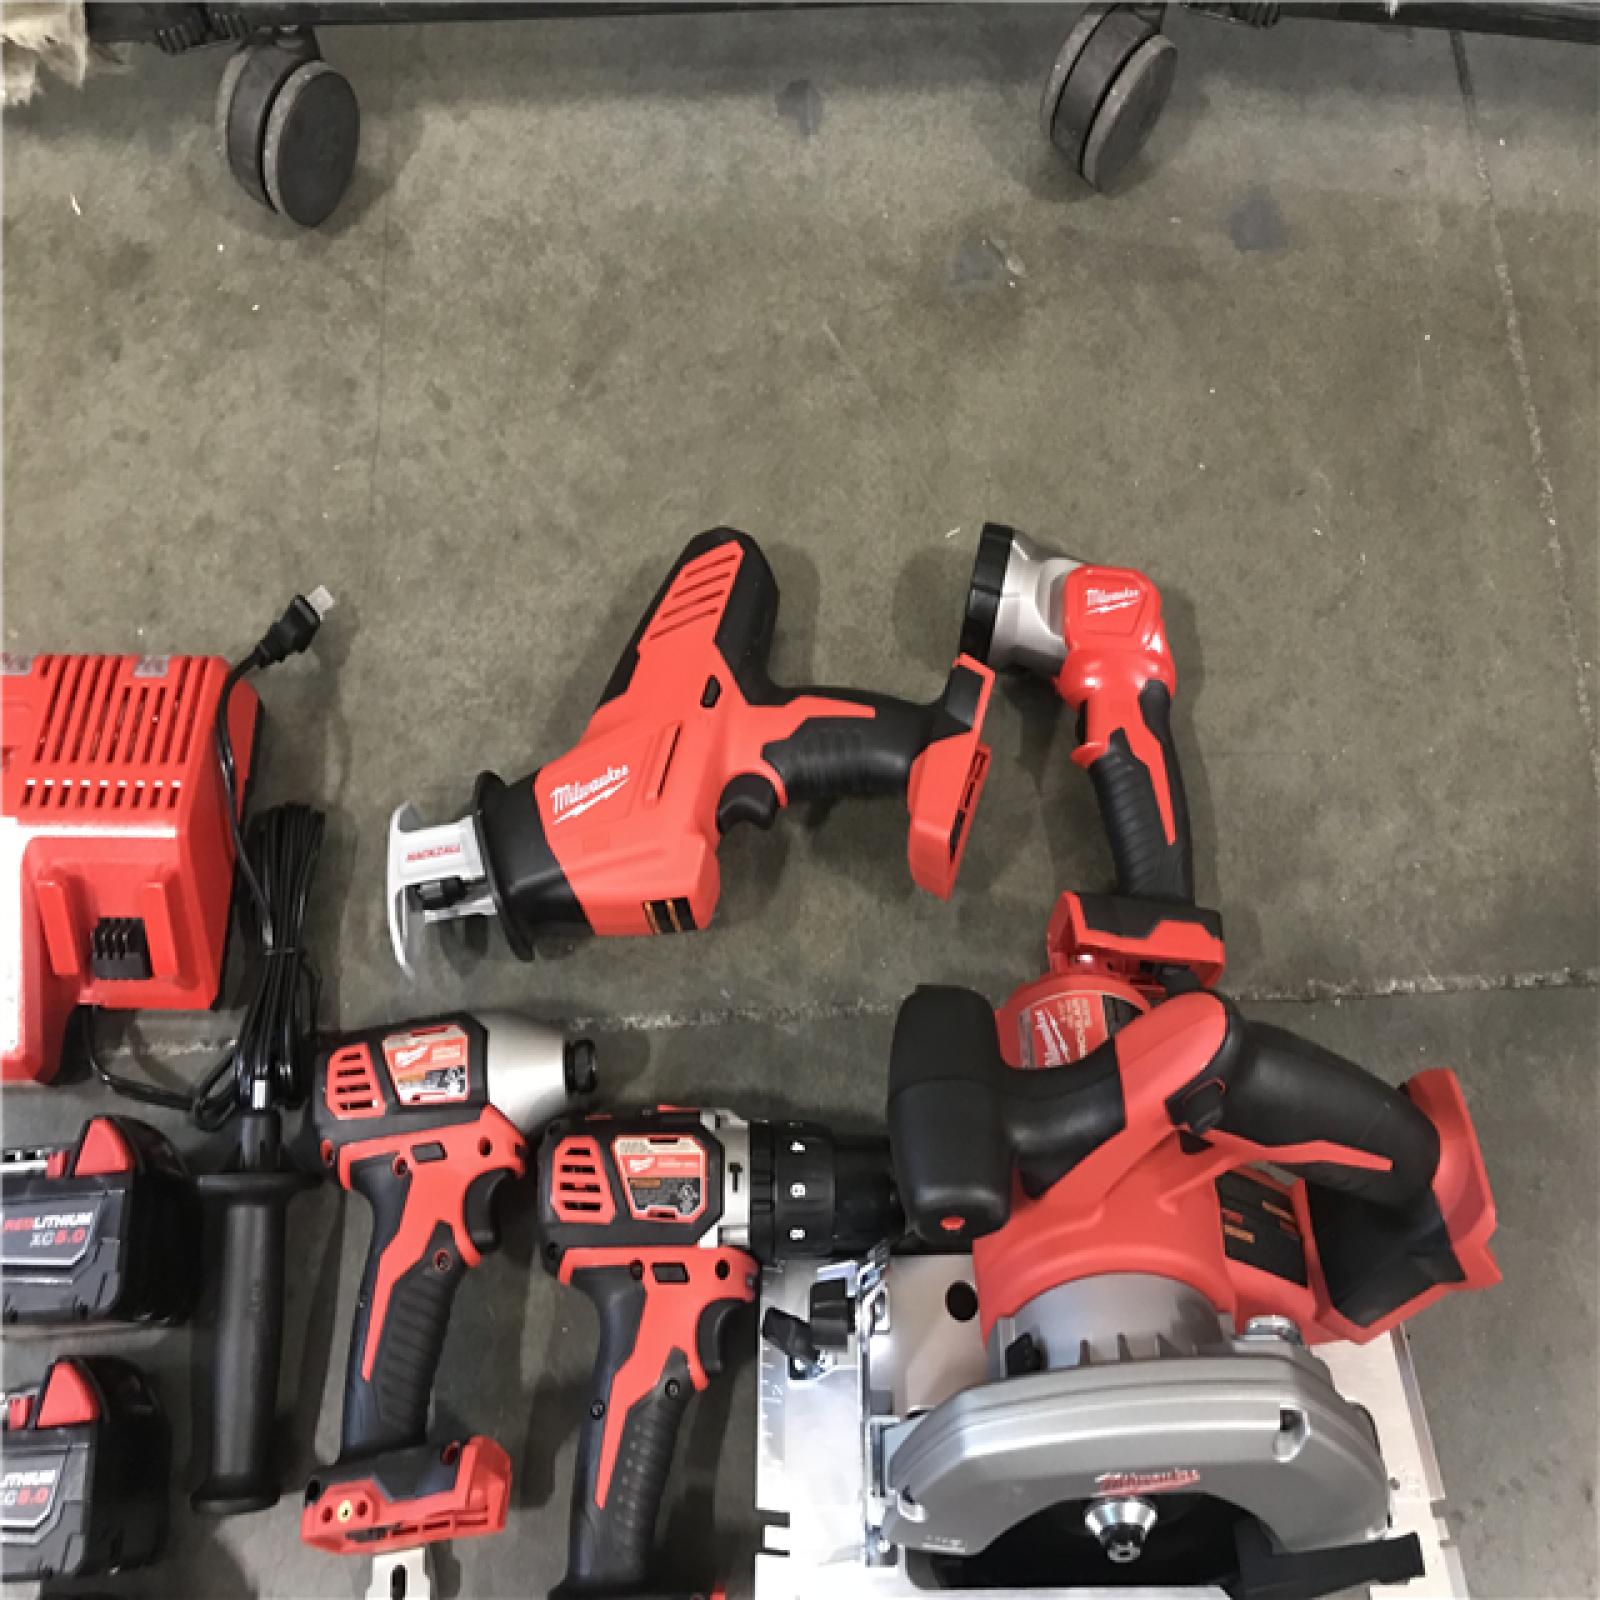 California NEW Milwaukee M18 18V Lithium-Ion Cordless 8 Tool Combo Kit With 3 Batteries, Charger, and Tool Bags